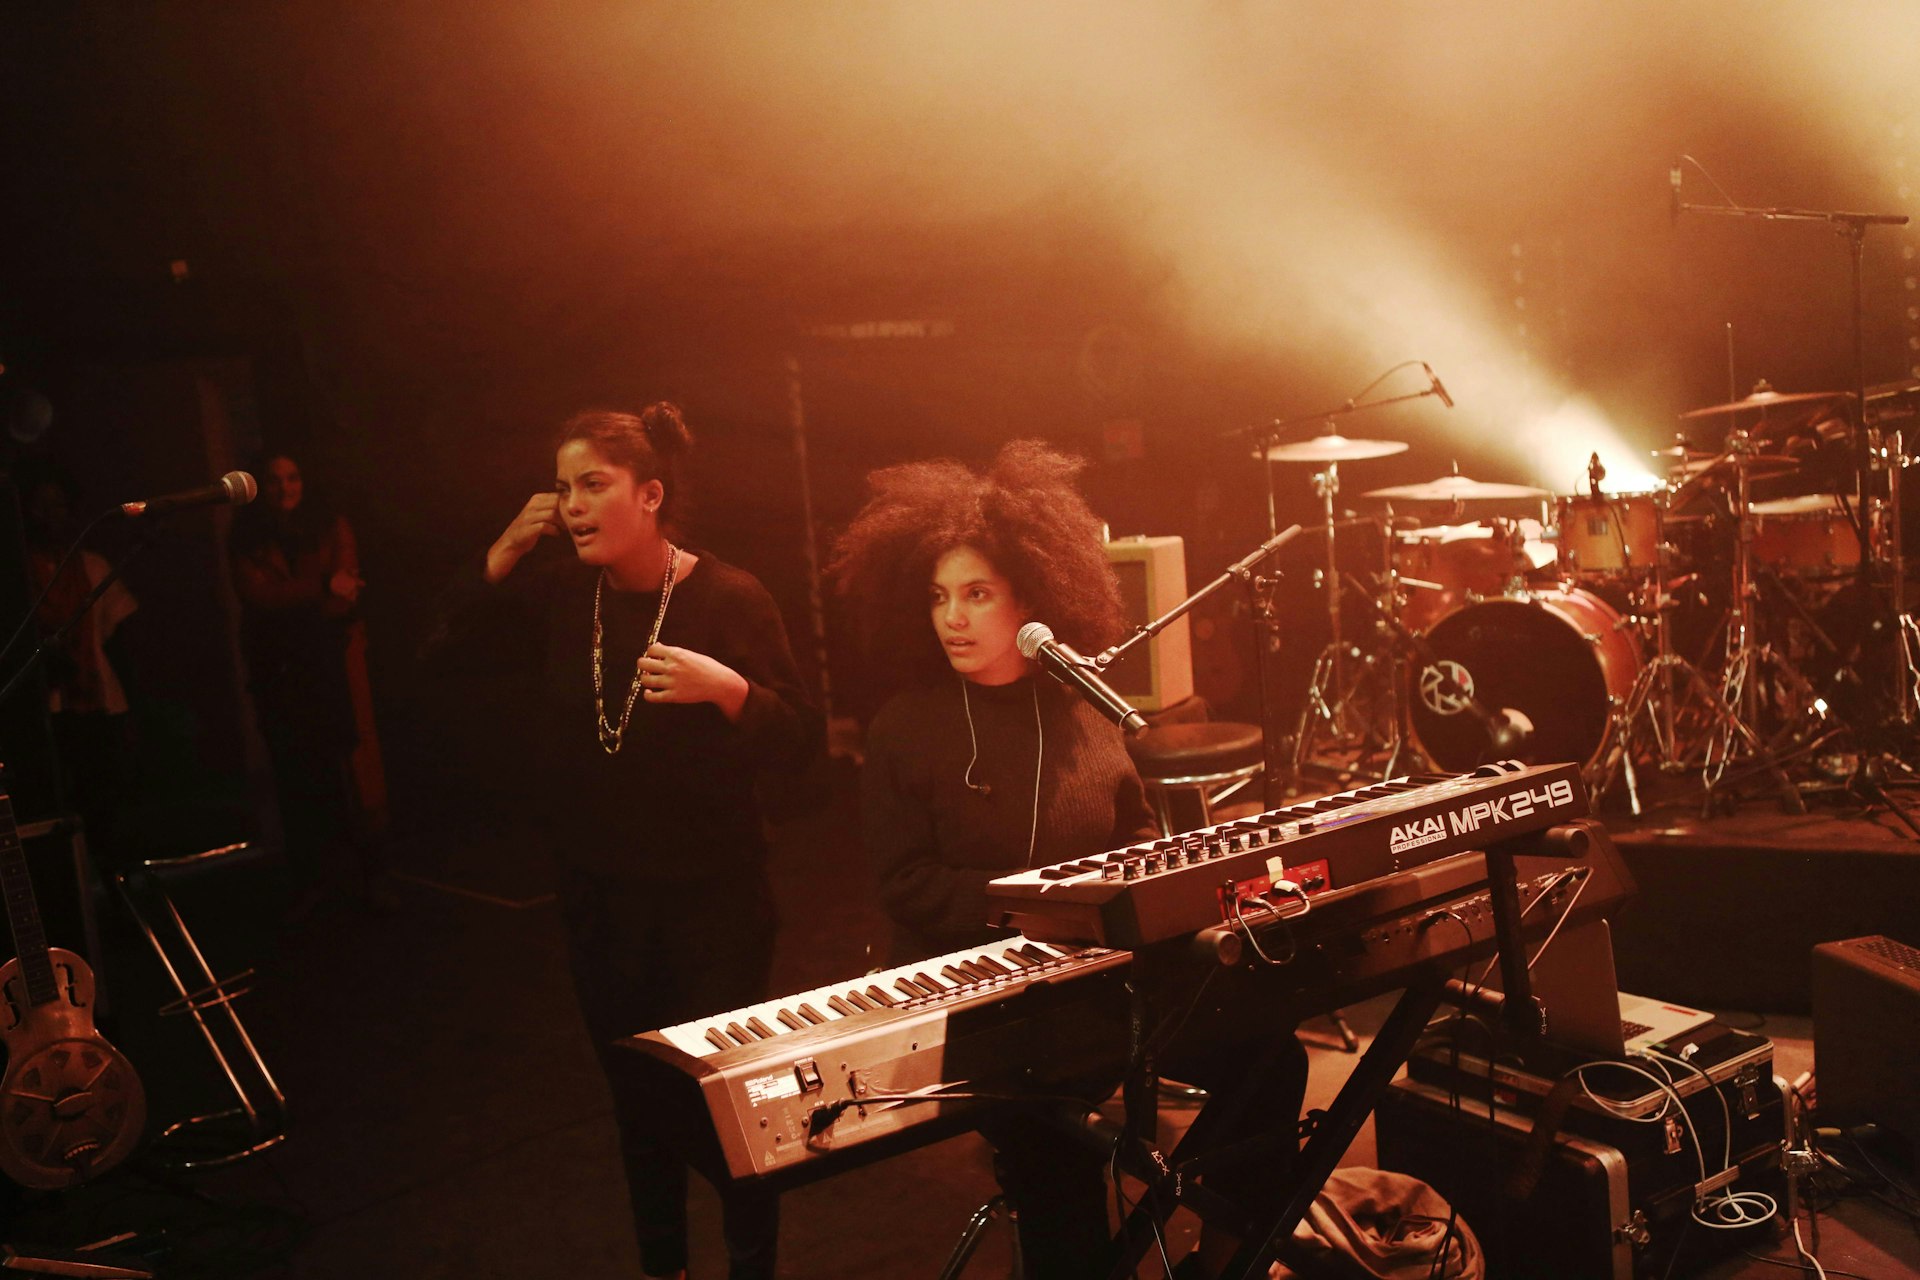 From Paris to Havana, Ibeyi take beats from the past to create prayers for the future